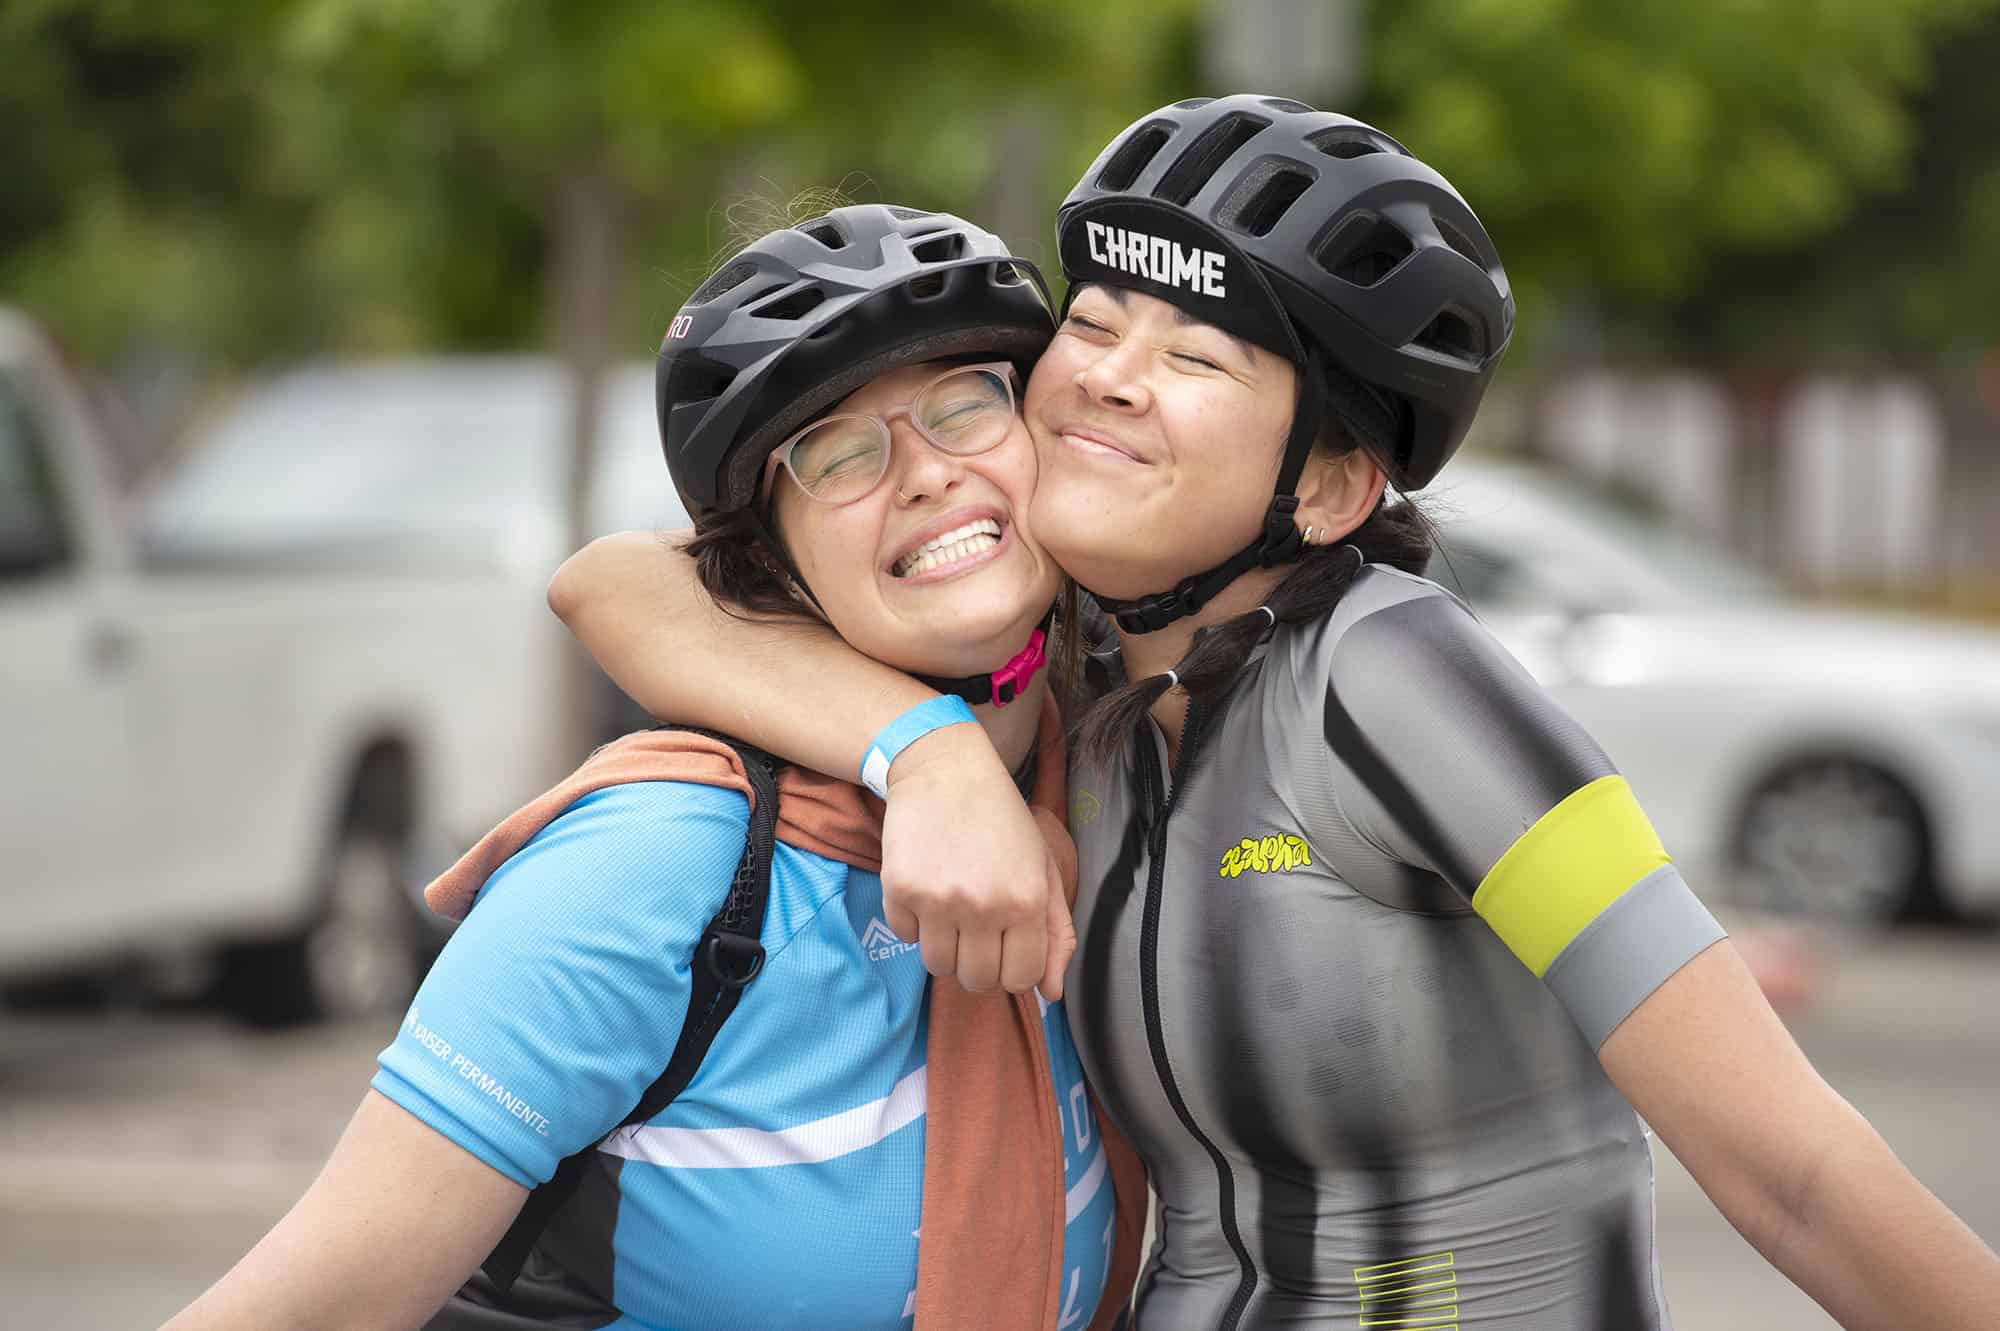 Pedal to Resettle in Santa Rosa, Calif. on Saturday, June 17, 2023.